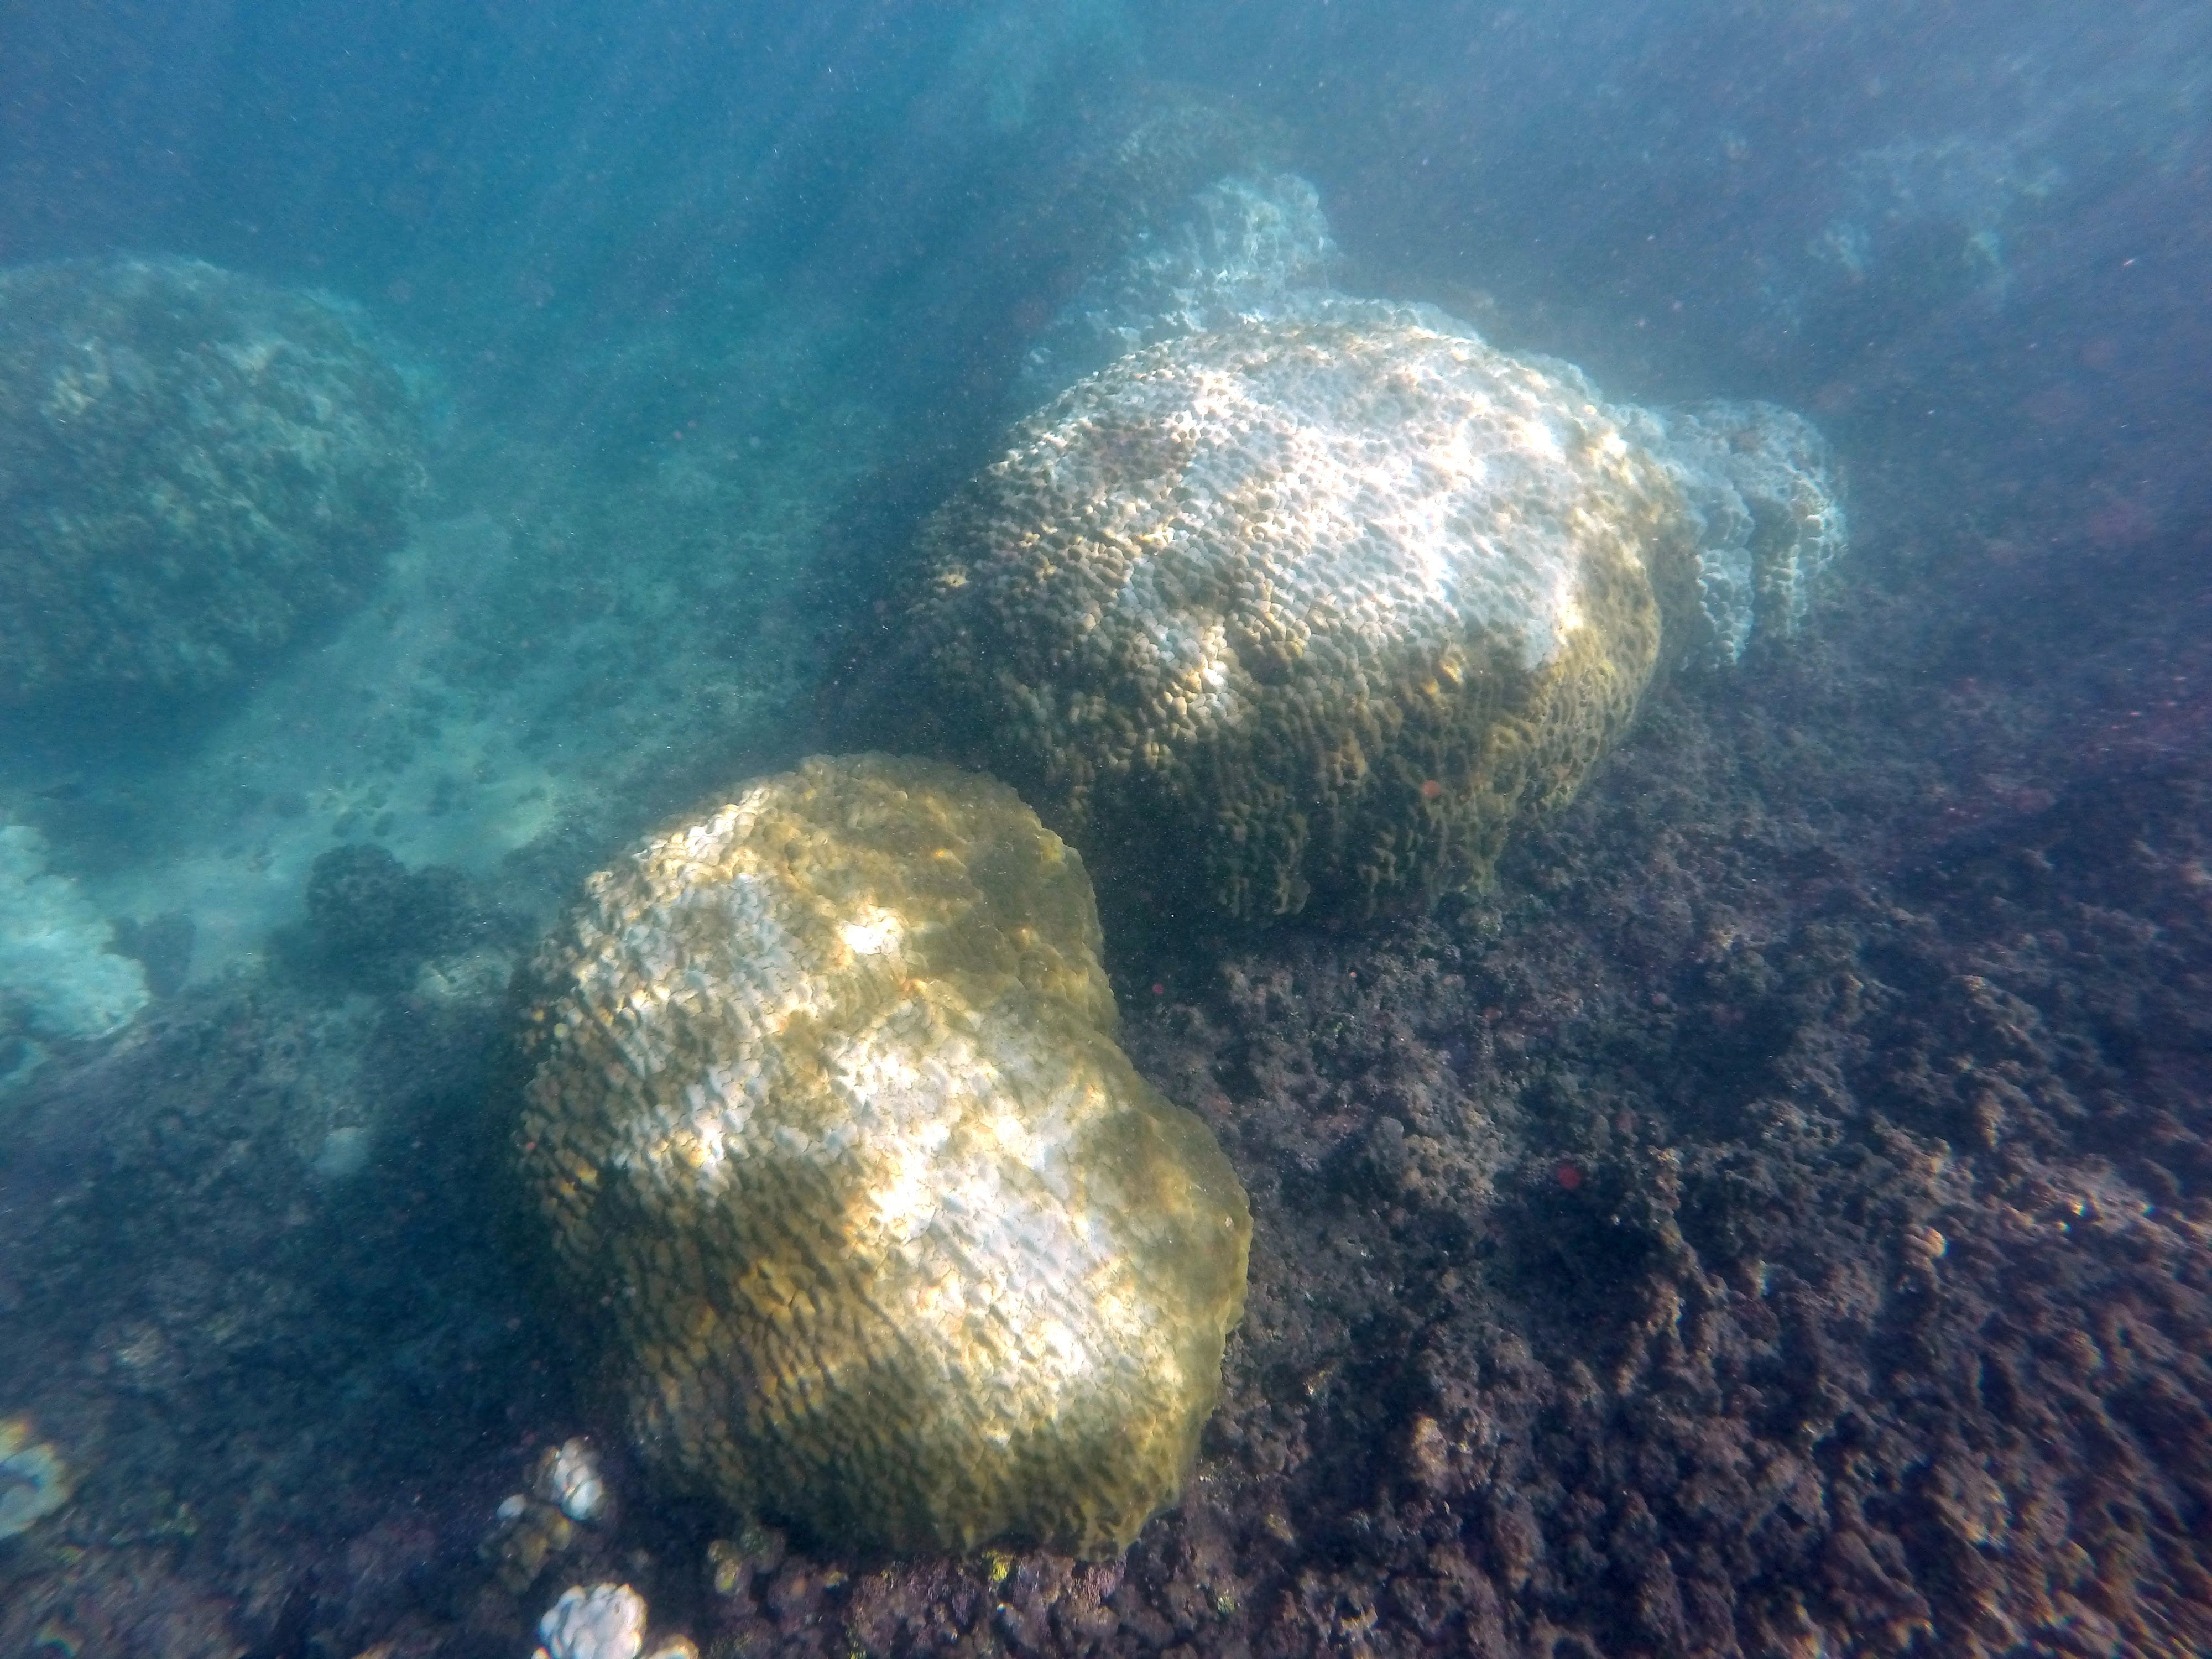 mound coral recovery 12.6.15